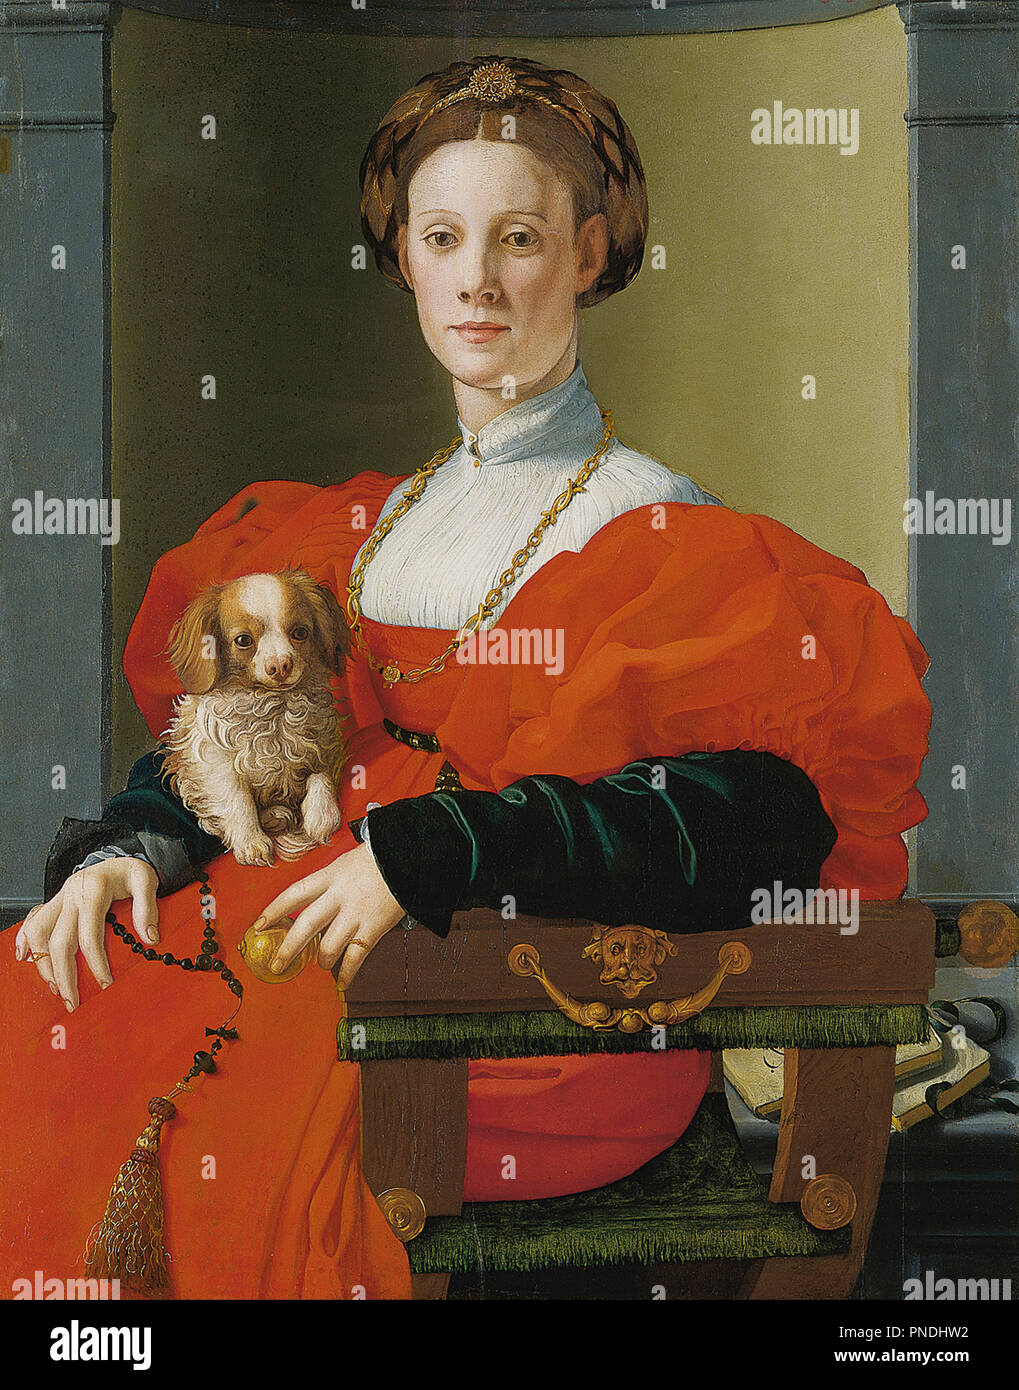 Portrait of a Lady with a Lapdog. Date/Period: 1537/1540. Poplar. Width: 70.5 cm. Height: 89.8 cm (Complete). Author: Agnolo Bronzino (Jacopo Carucci). Pontormo. Jacopo Pontormo. Stock Photo